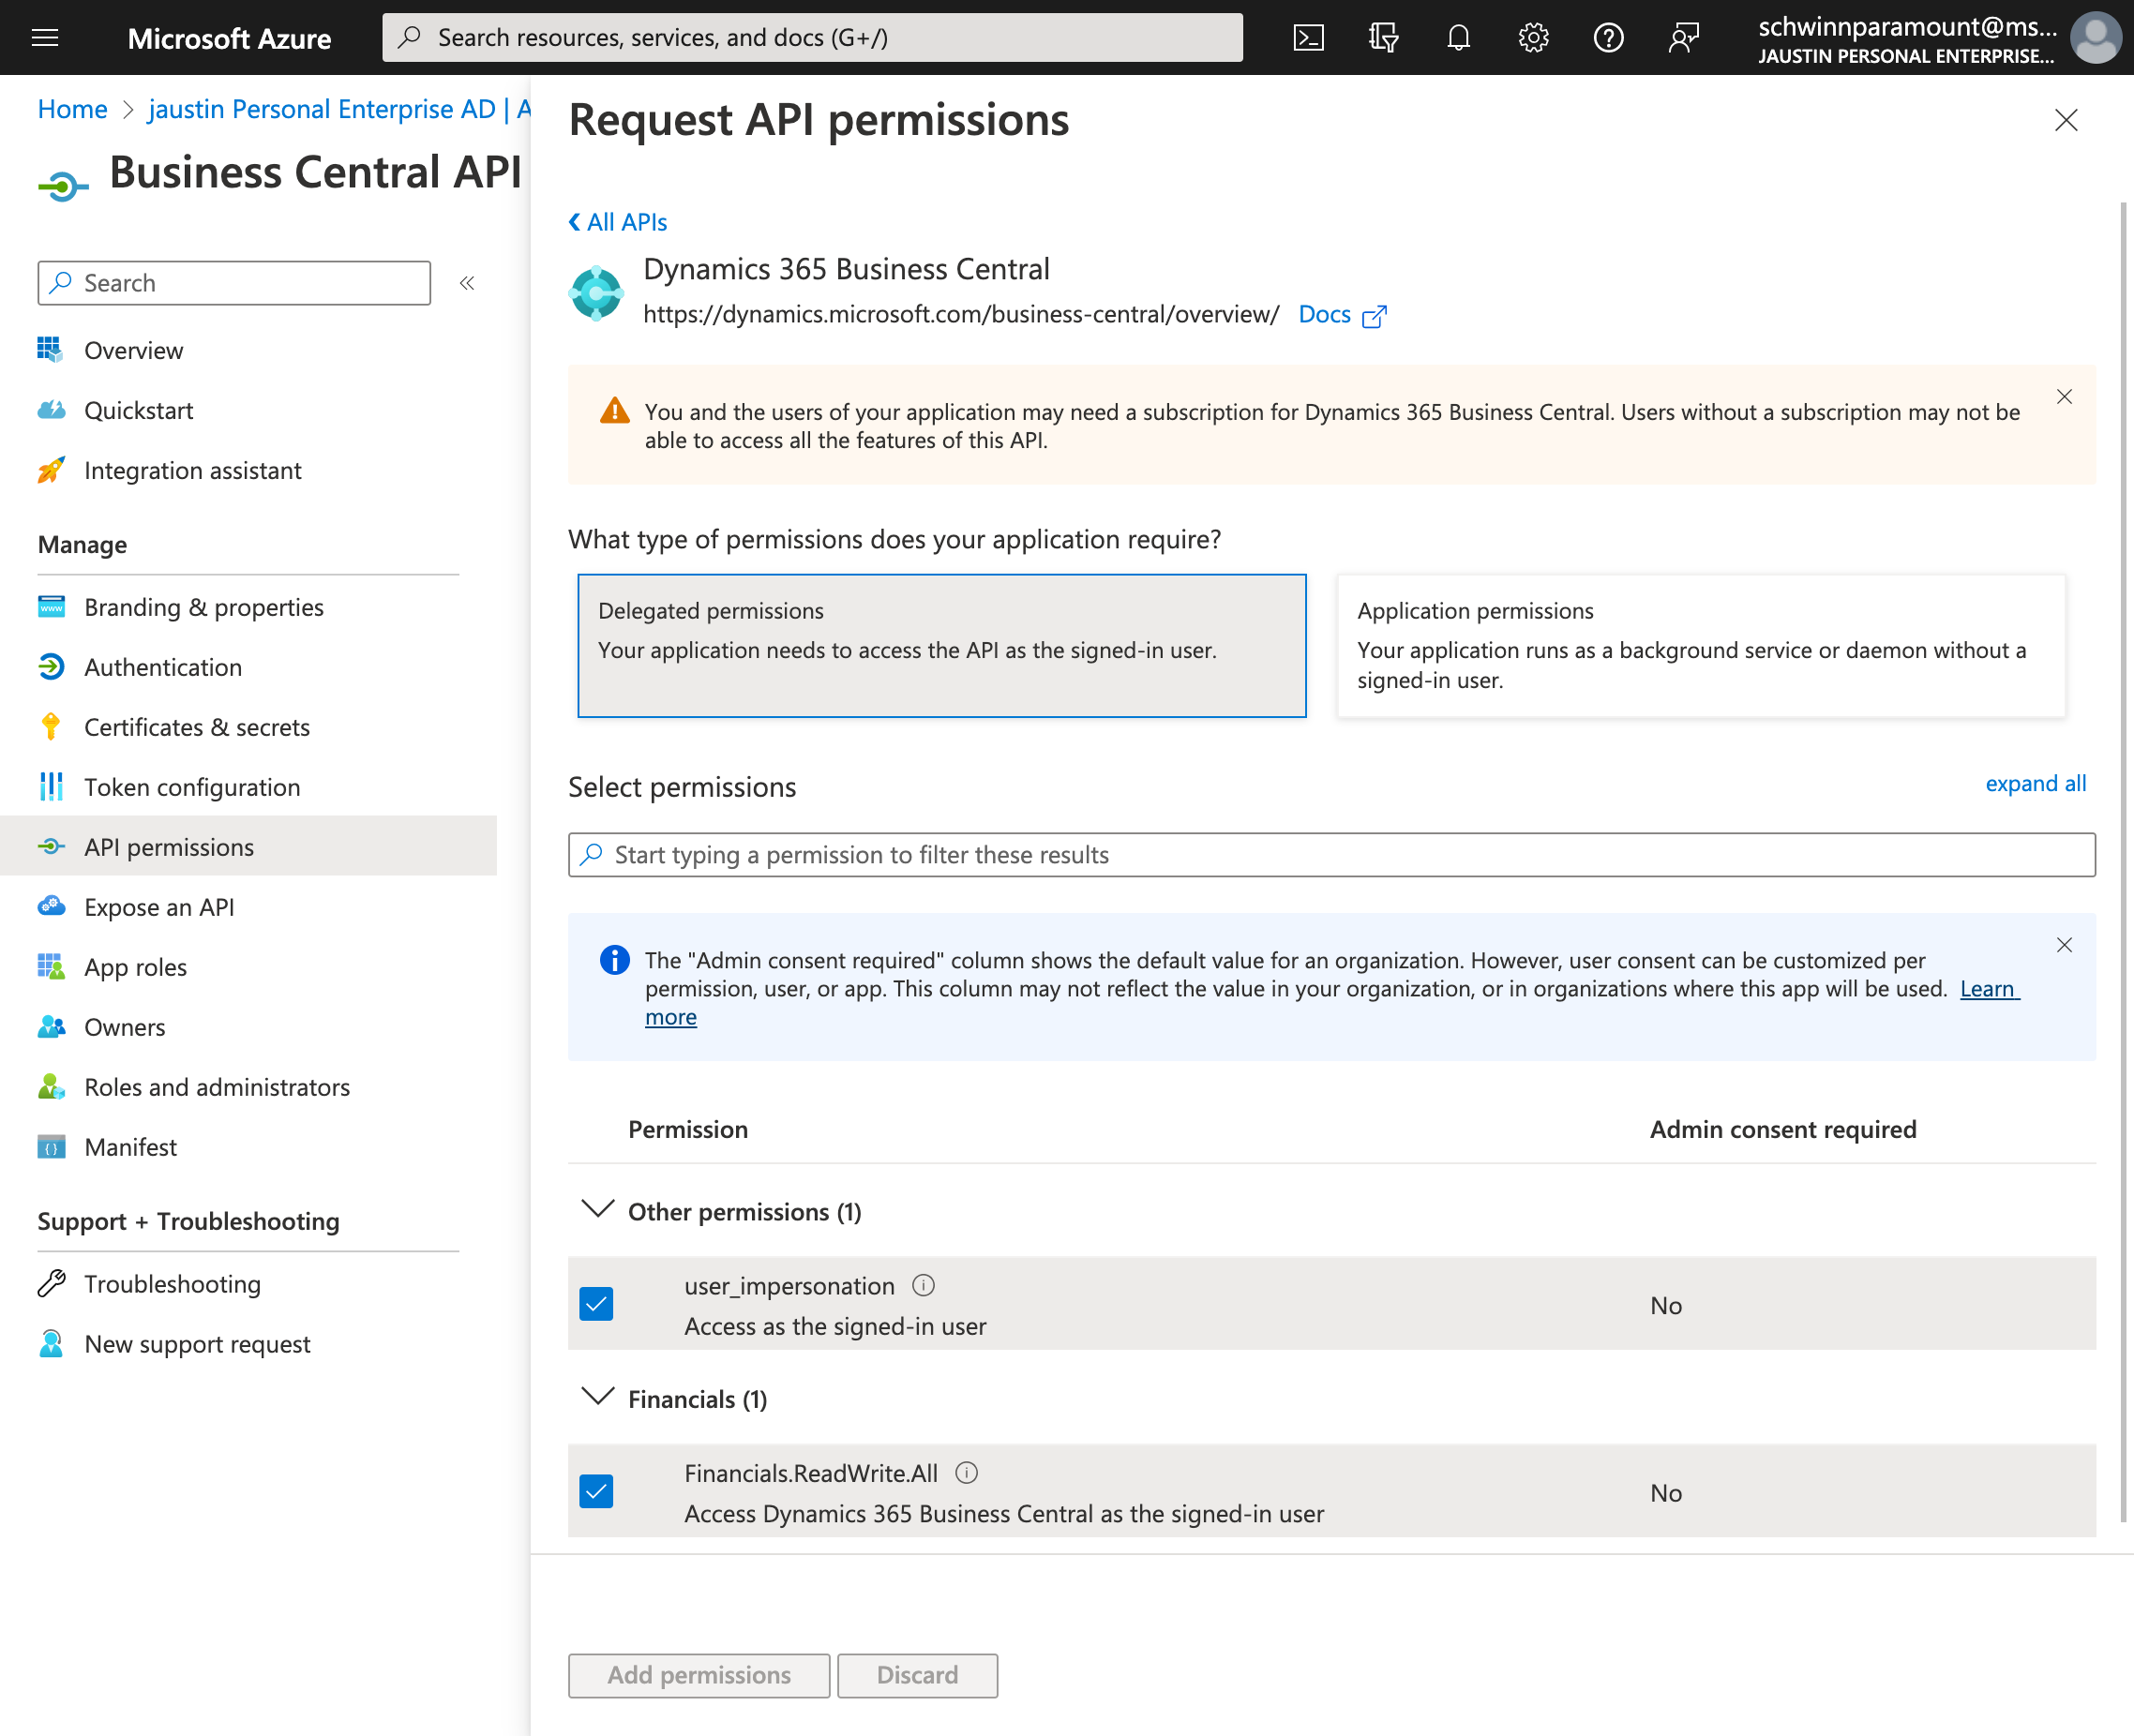 A graphic showing the delegated API permissions for an application in Microsoft Azure.